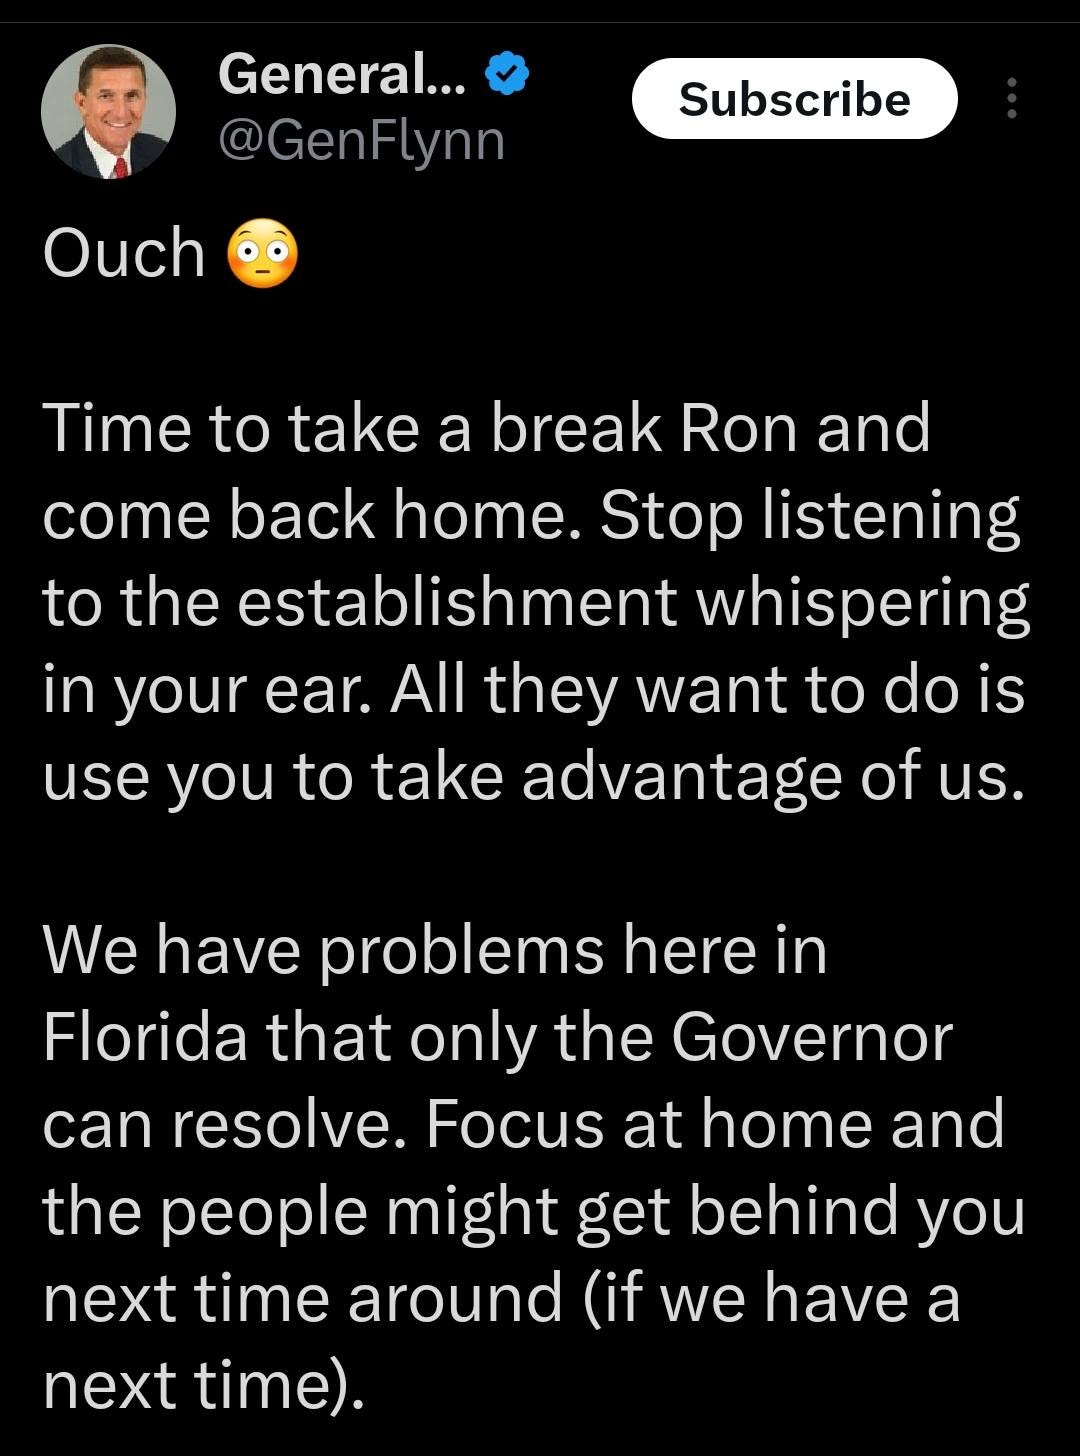 May be an image of 1 person and text that says '12:08 23%_ Post General... @GenFlynn Ouch Subscribe Time to take a break Ron and come back home. Stop listening to the establishment whispering in your ear. All they want to do is use you to take advantage of us. We have problems here in Florida that only the Governor can resolve. Focus at home and the people might get behind you next time around (if we have a next time). @RonDeSantis @RogerJStoneJr il Donaldo Trumpo @Pa. Post your rep 1h'